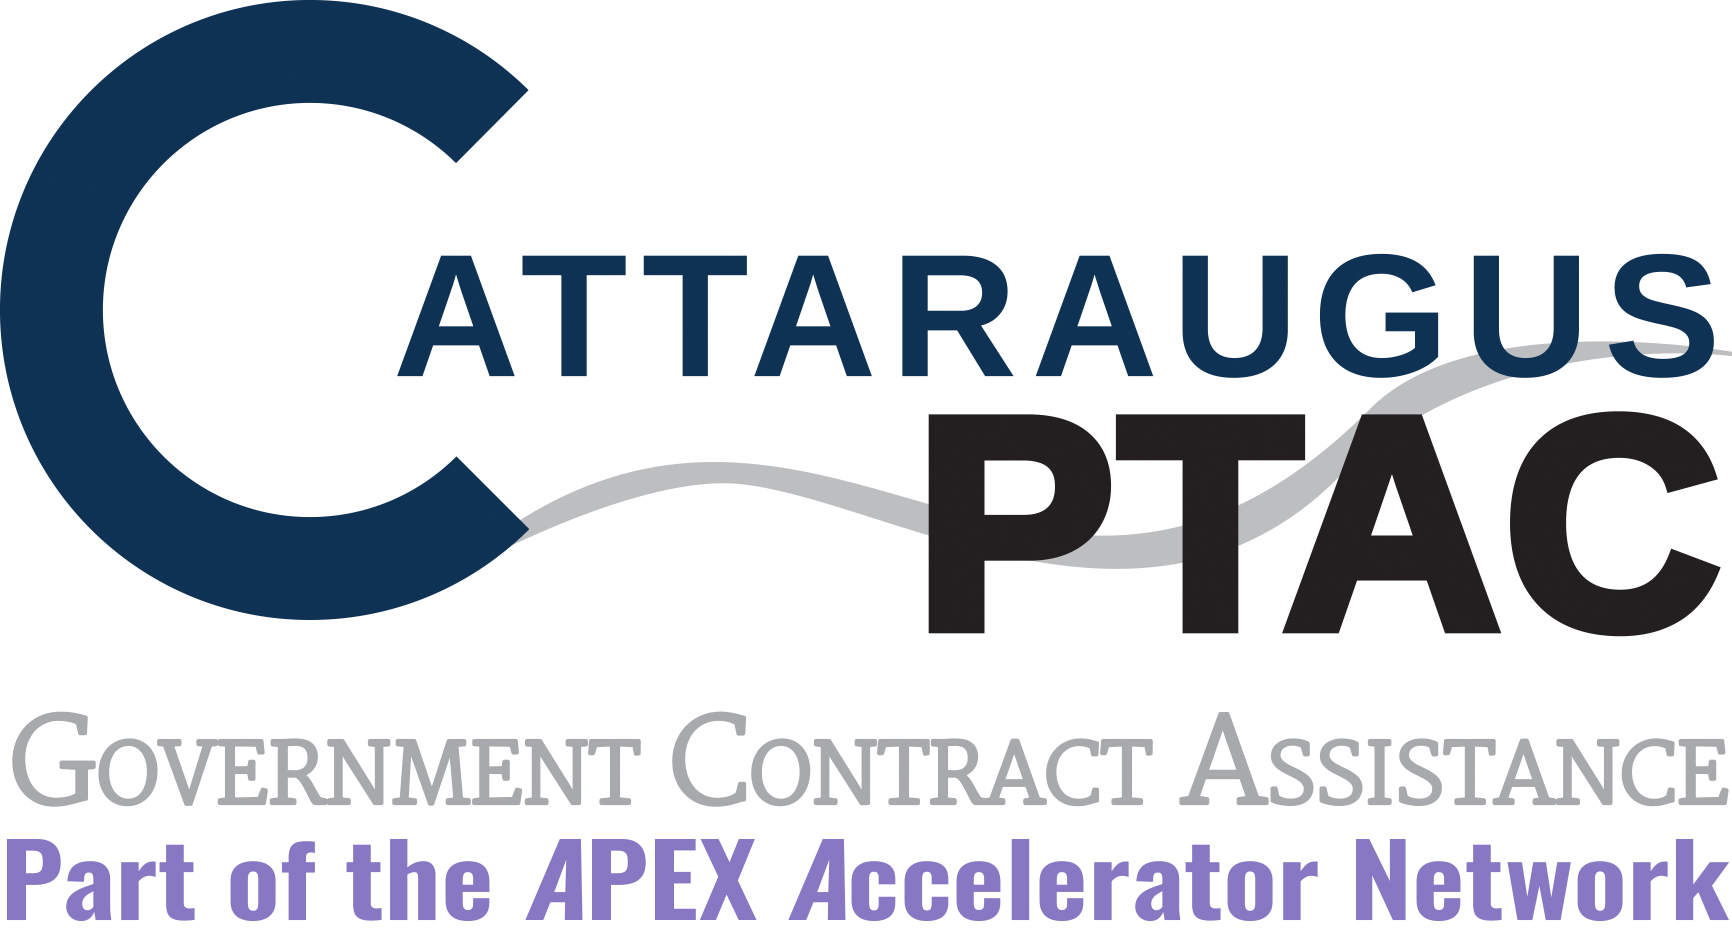 CCPTAC is part of the APEX Accelerator Network